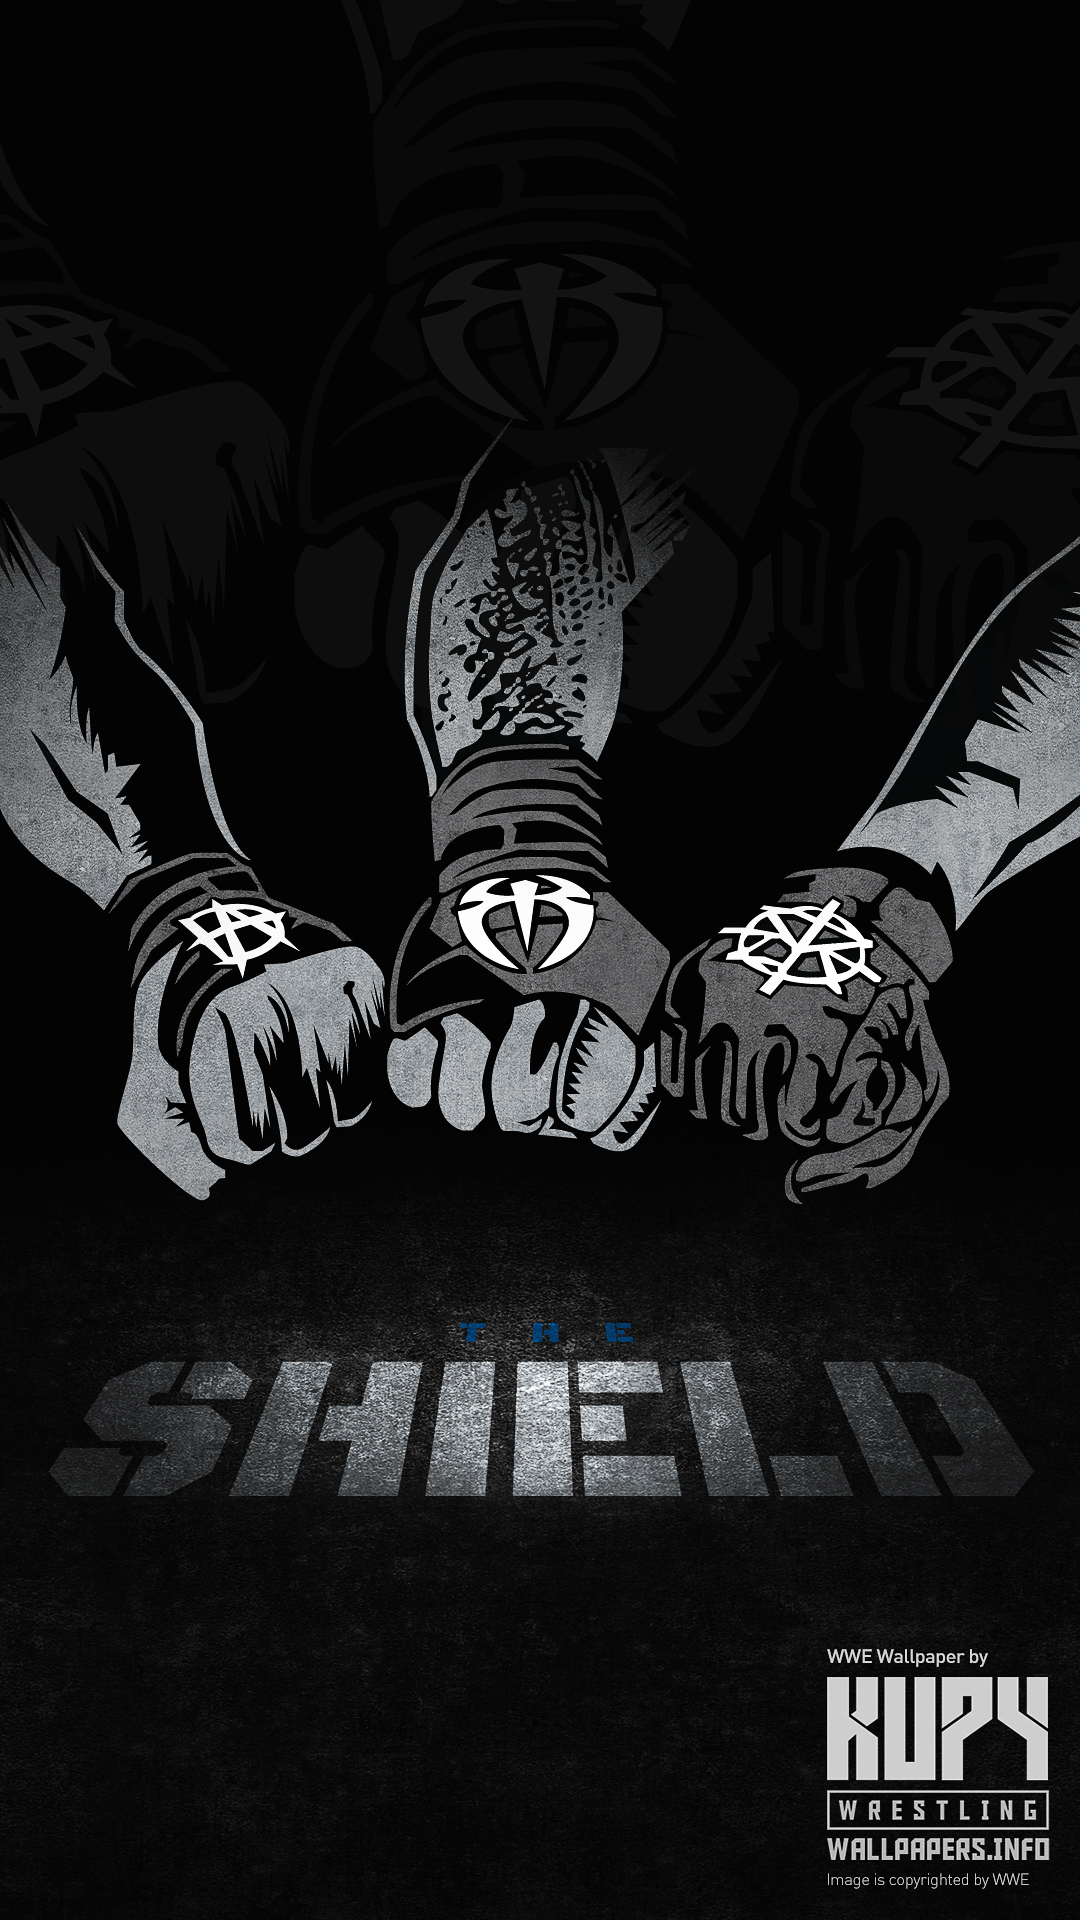 NEW The Shield Reunited wallpaper   Kupy Wrestling Wallpapers